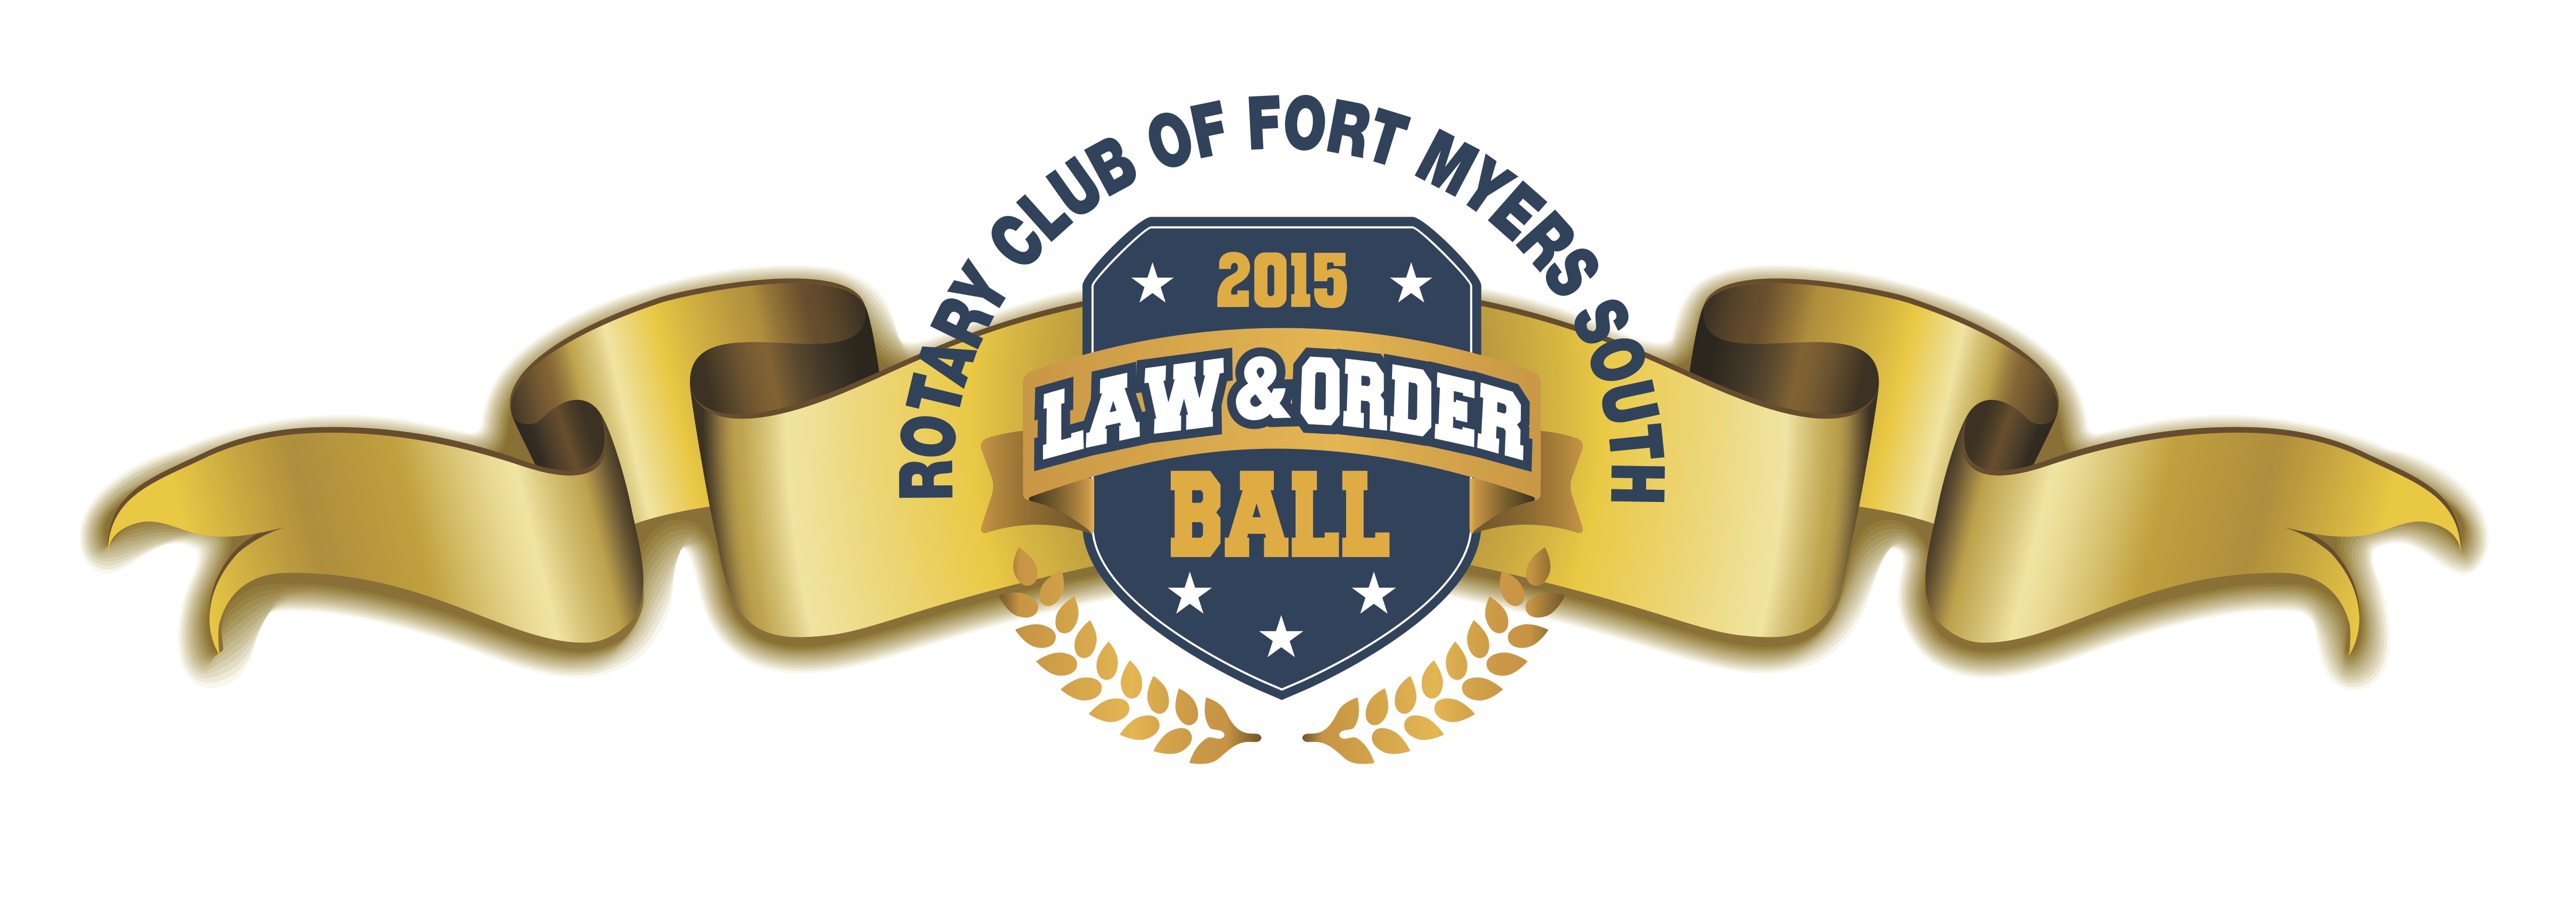 Explorers Get Ready to Dress to Impress at the Law and Order Ball